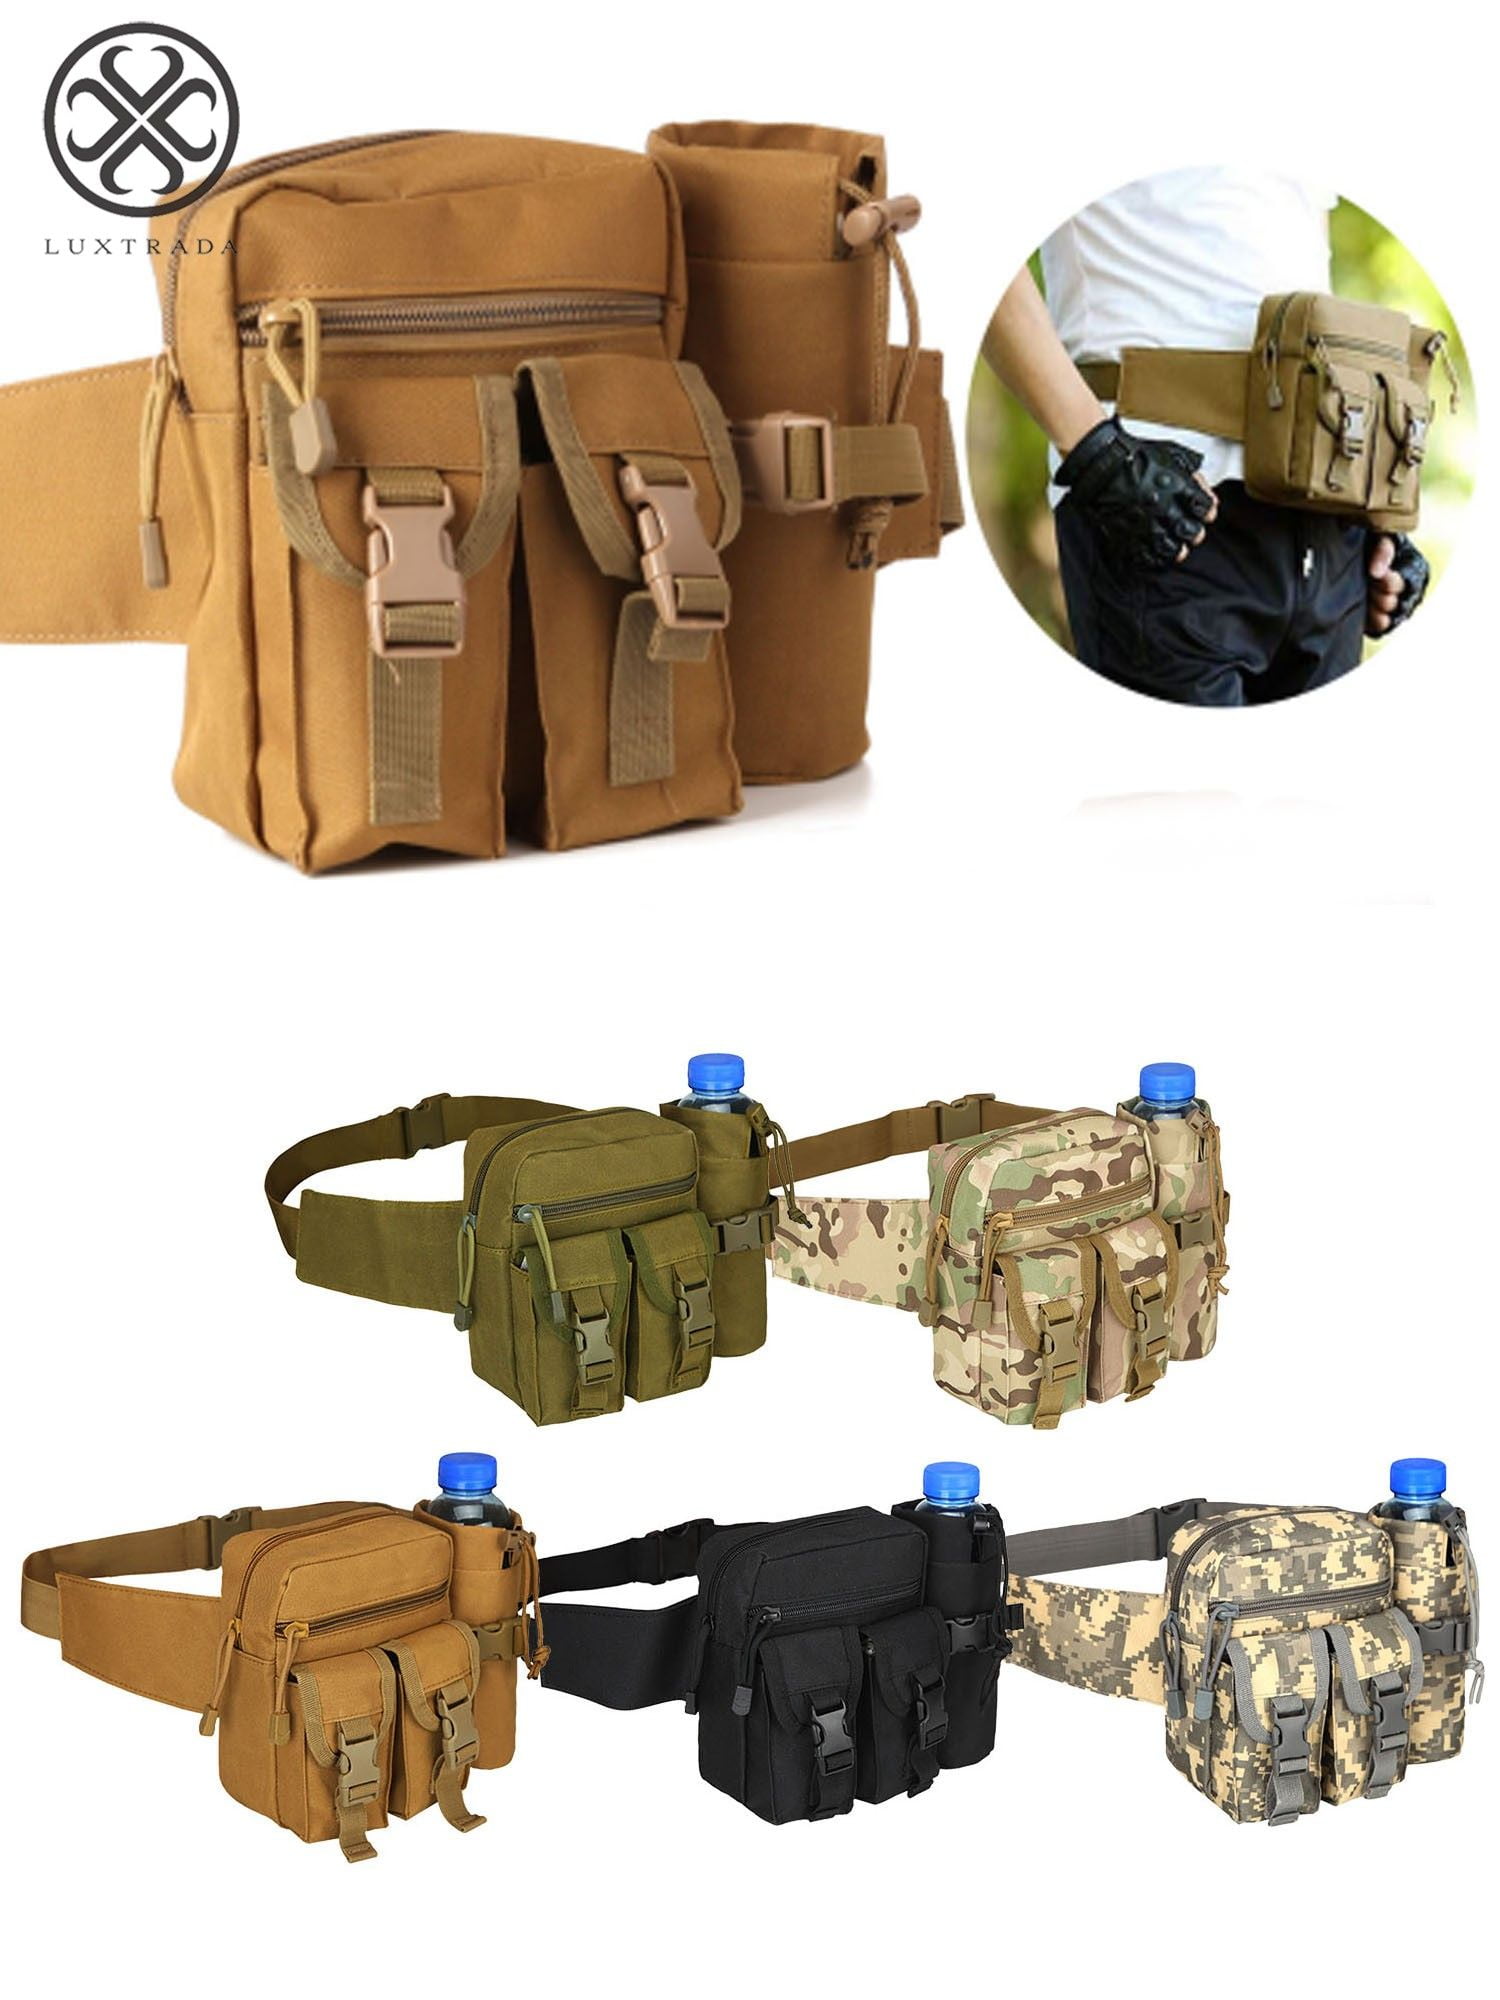 Military Molle Tactical 3 Way Waist Bag Pouch Camping Shoulder Bag Travel Hiking 